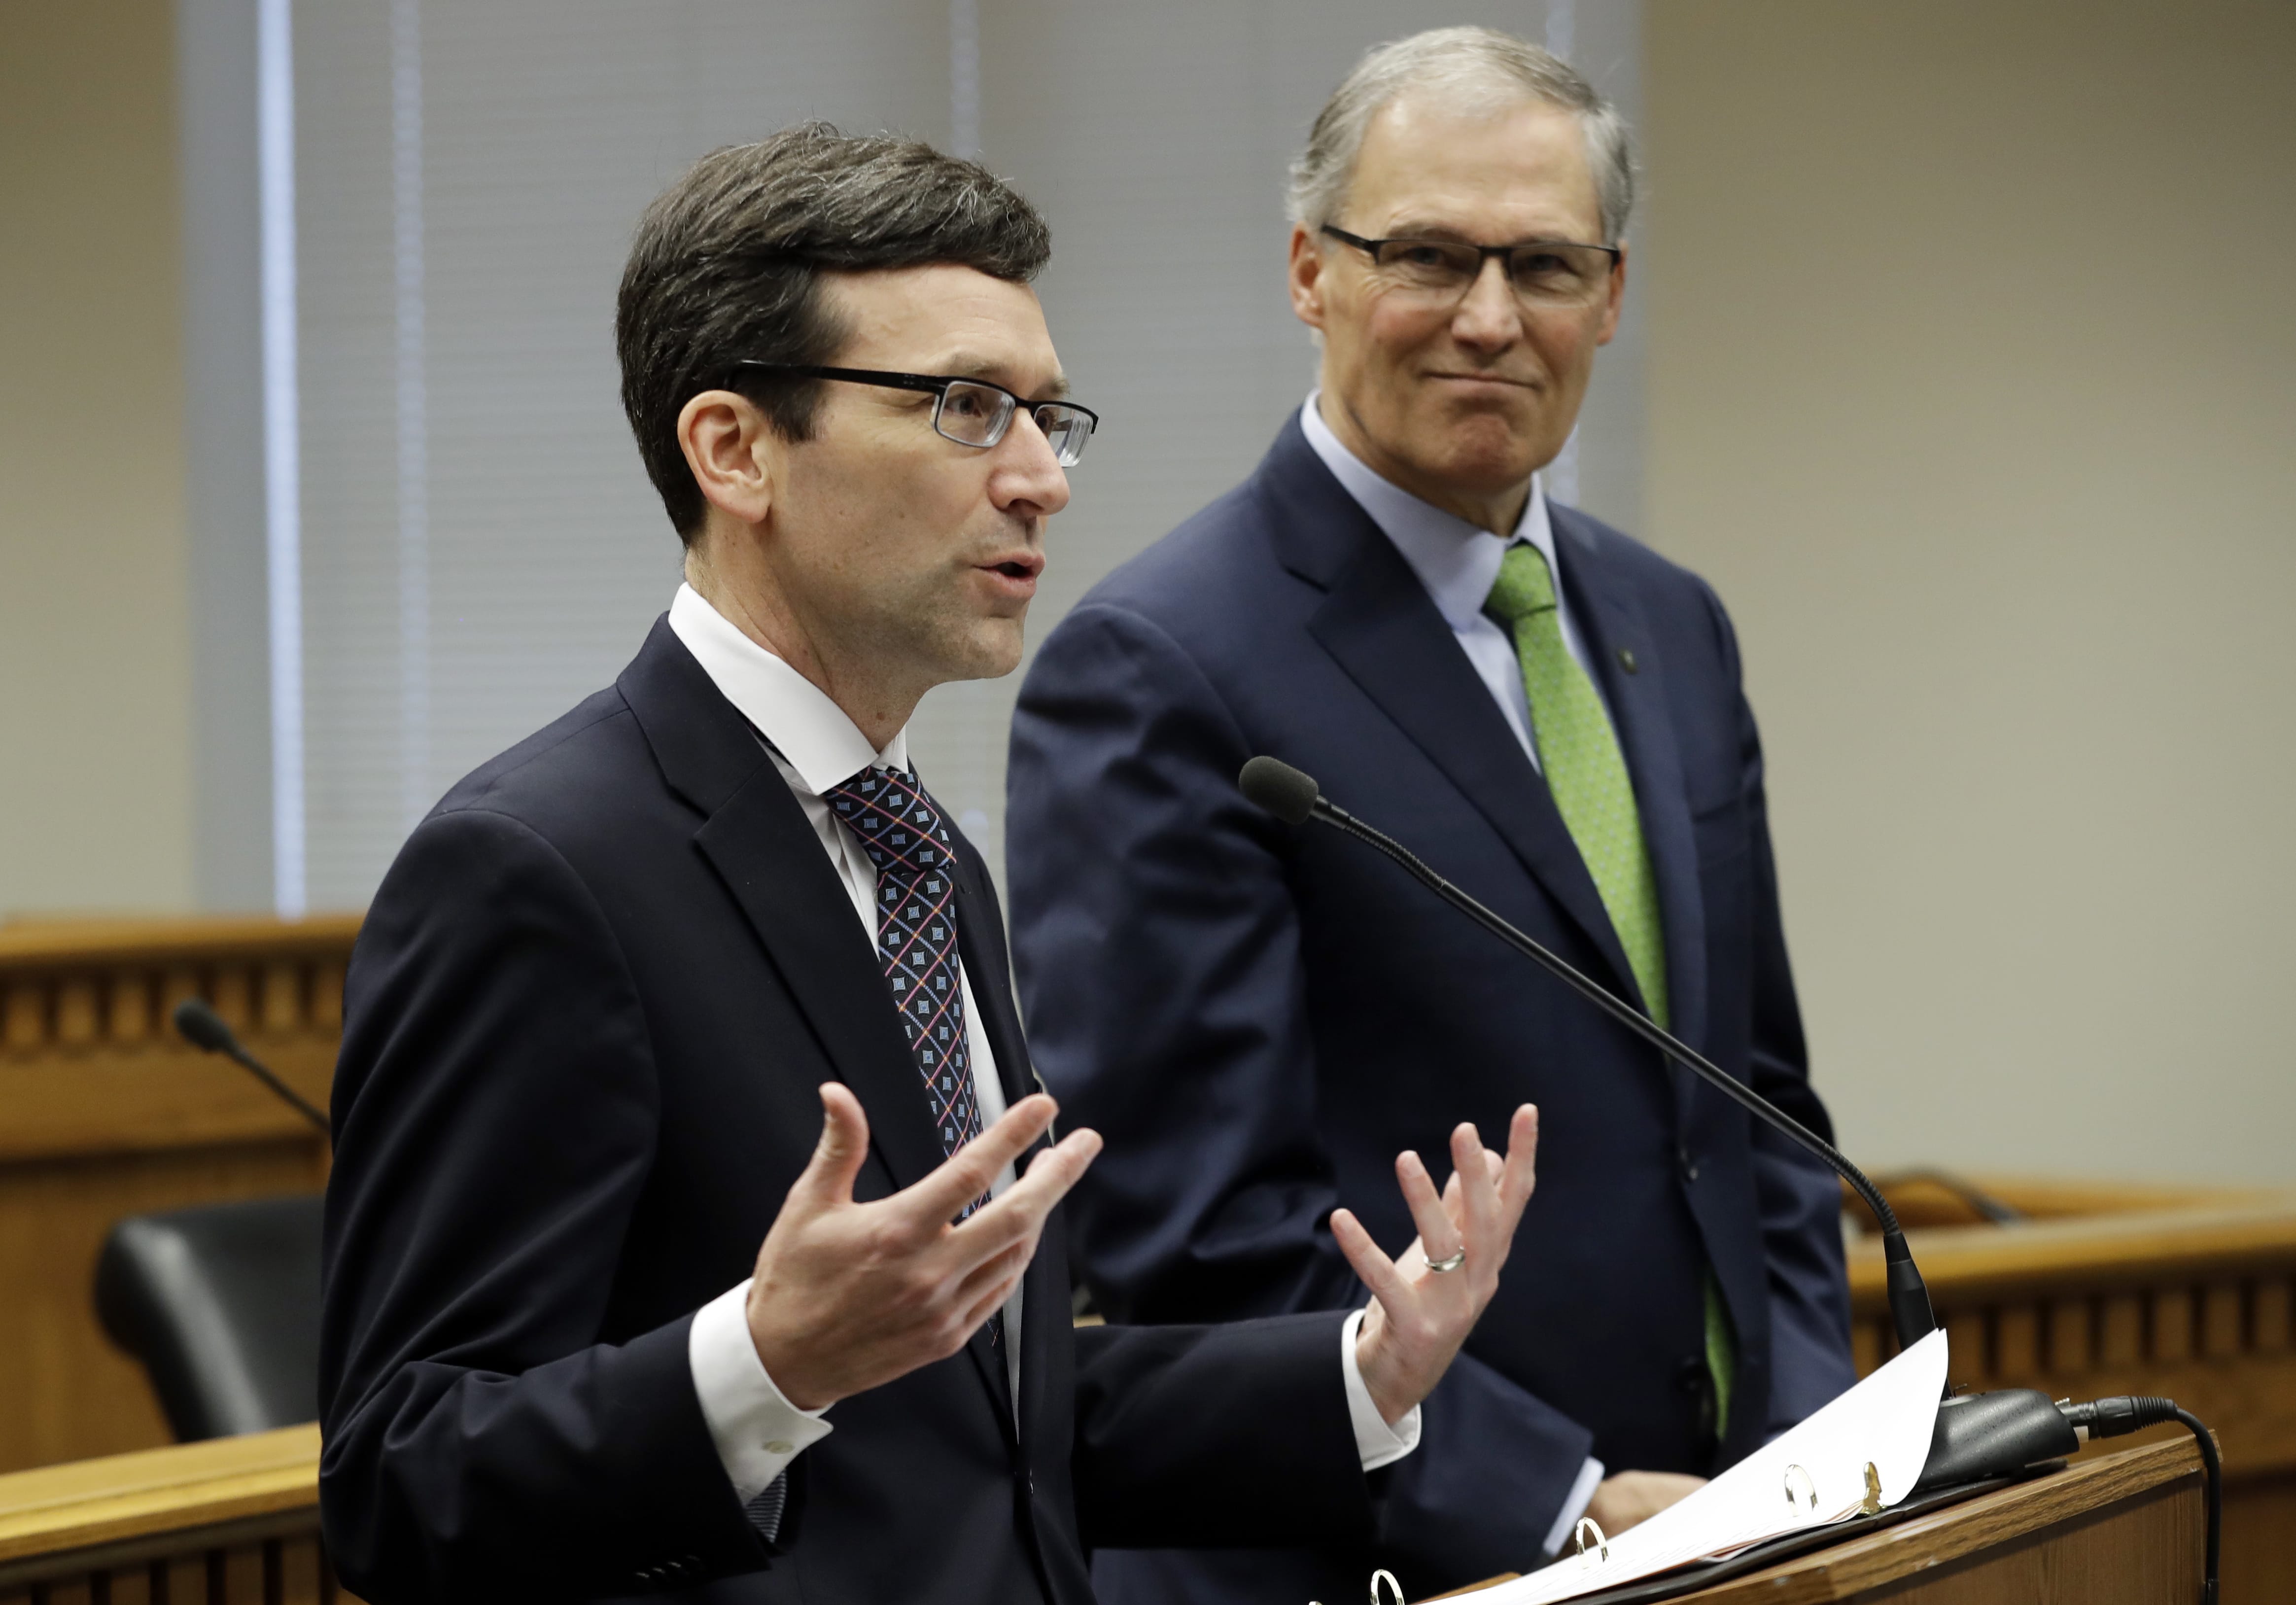 Washington Attorney General Bob Ferguson, left, talks to reporters as Washington Gov. Jay Inslee looks on Jan. 4 at the Capitol in Olympia. Ferguson is among the state attorneys general who signed the petition to bring back net neutrality. (AP Photo/Ted S.